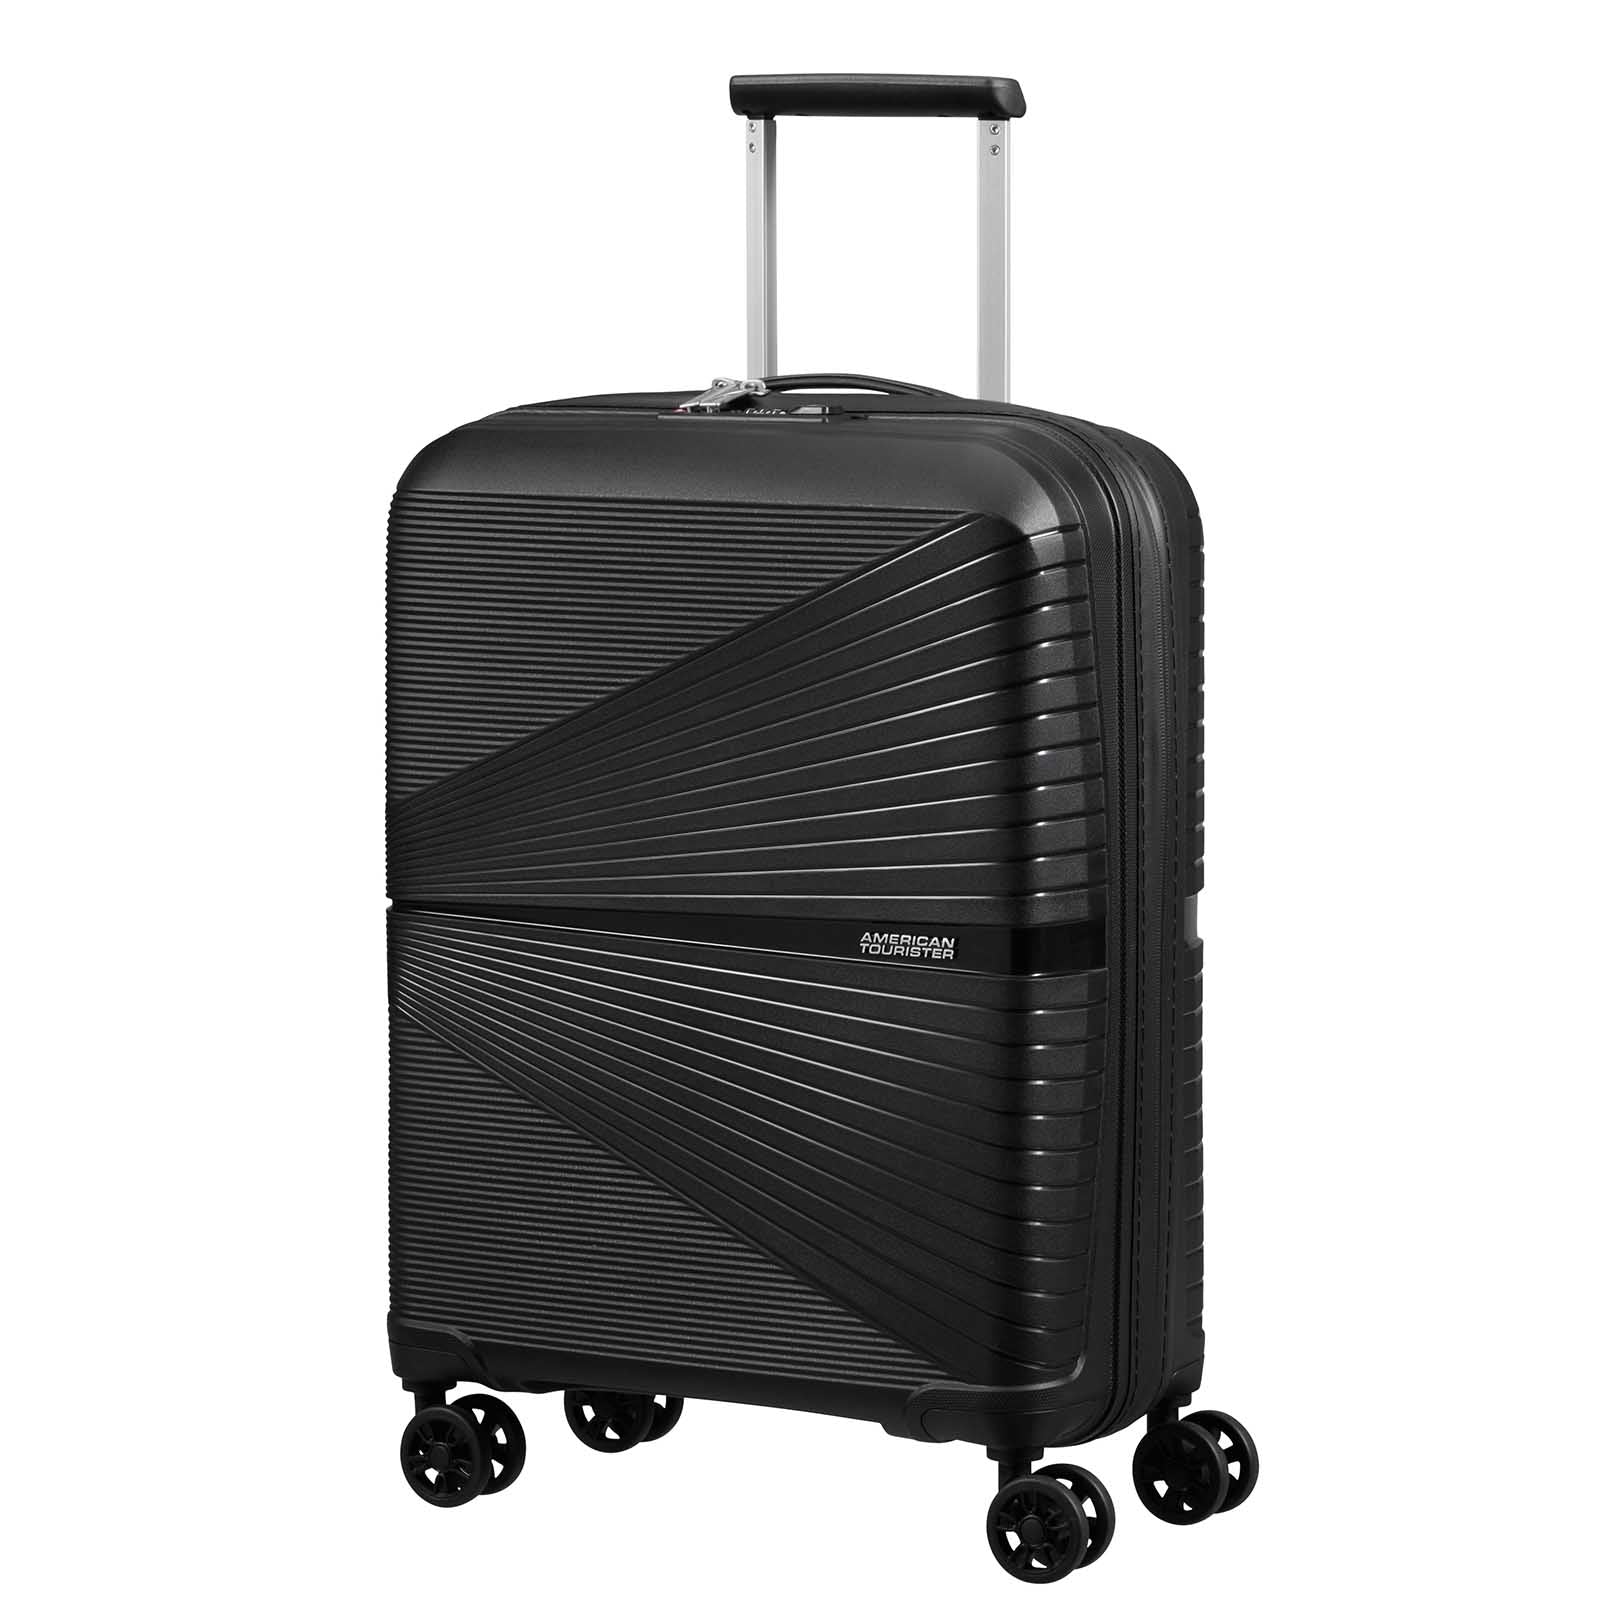 American-Tourister-Airconic-55cm-Carry-On-Suitcase-Onyx-Black-Front-Angle